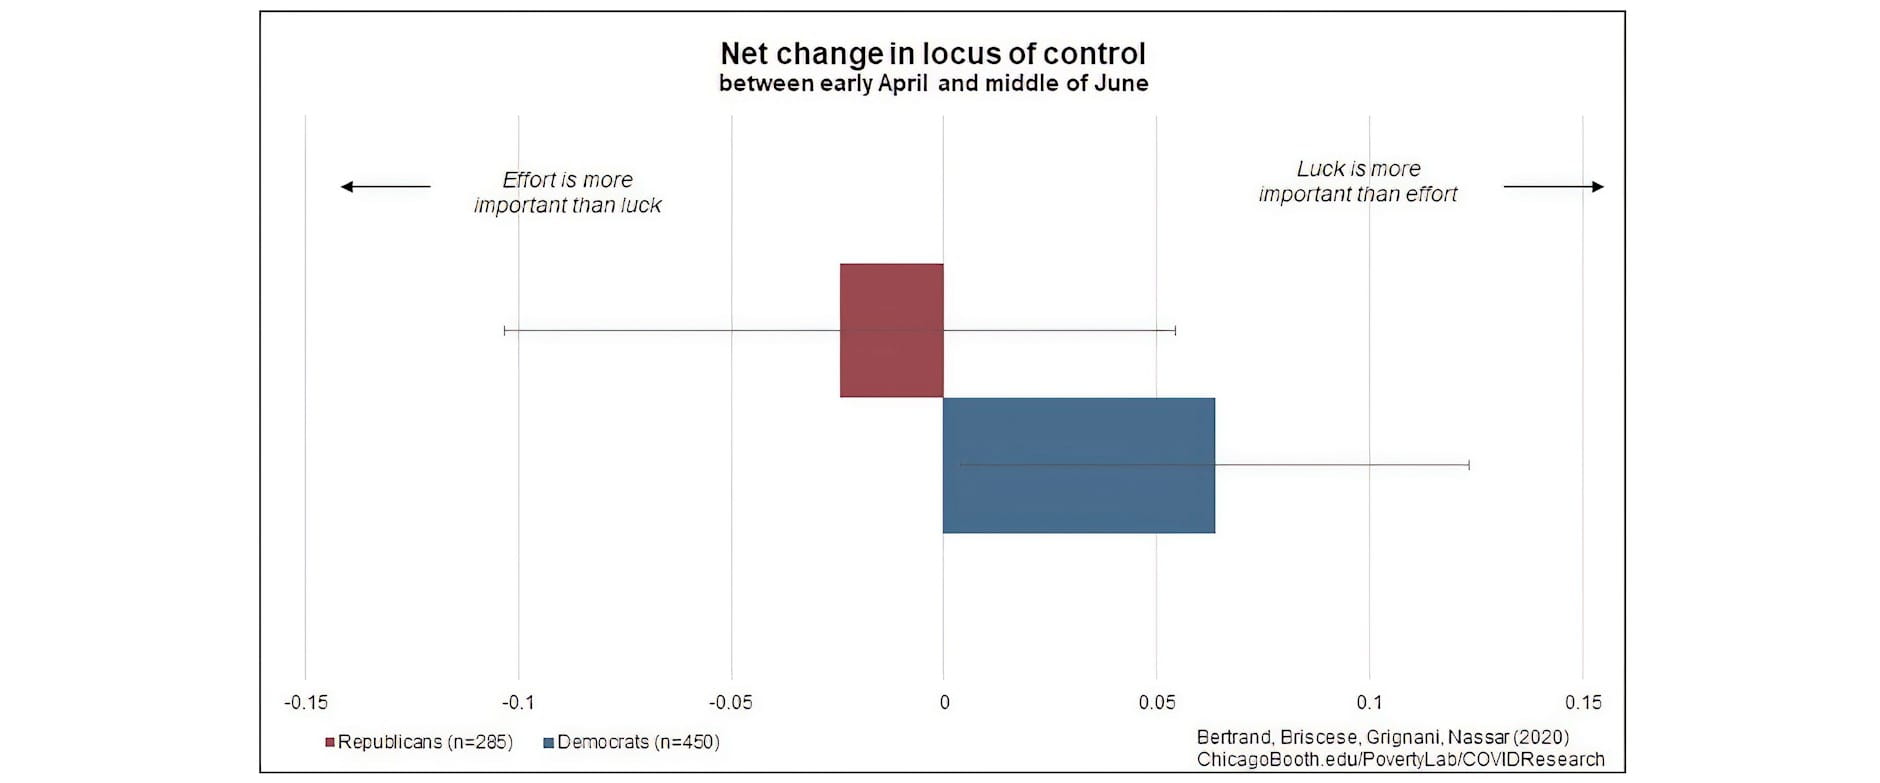 Graph showing percent change in views on locus of control